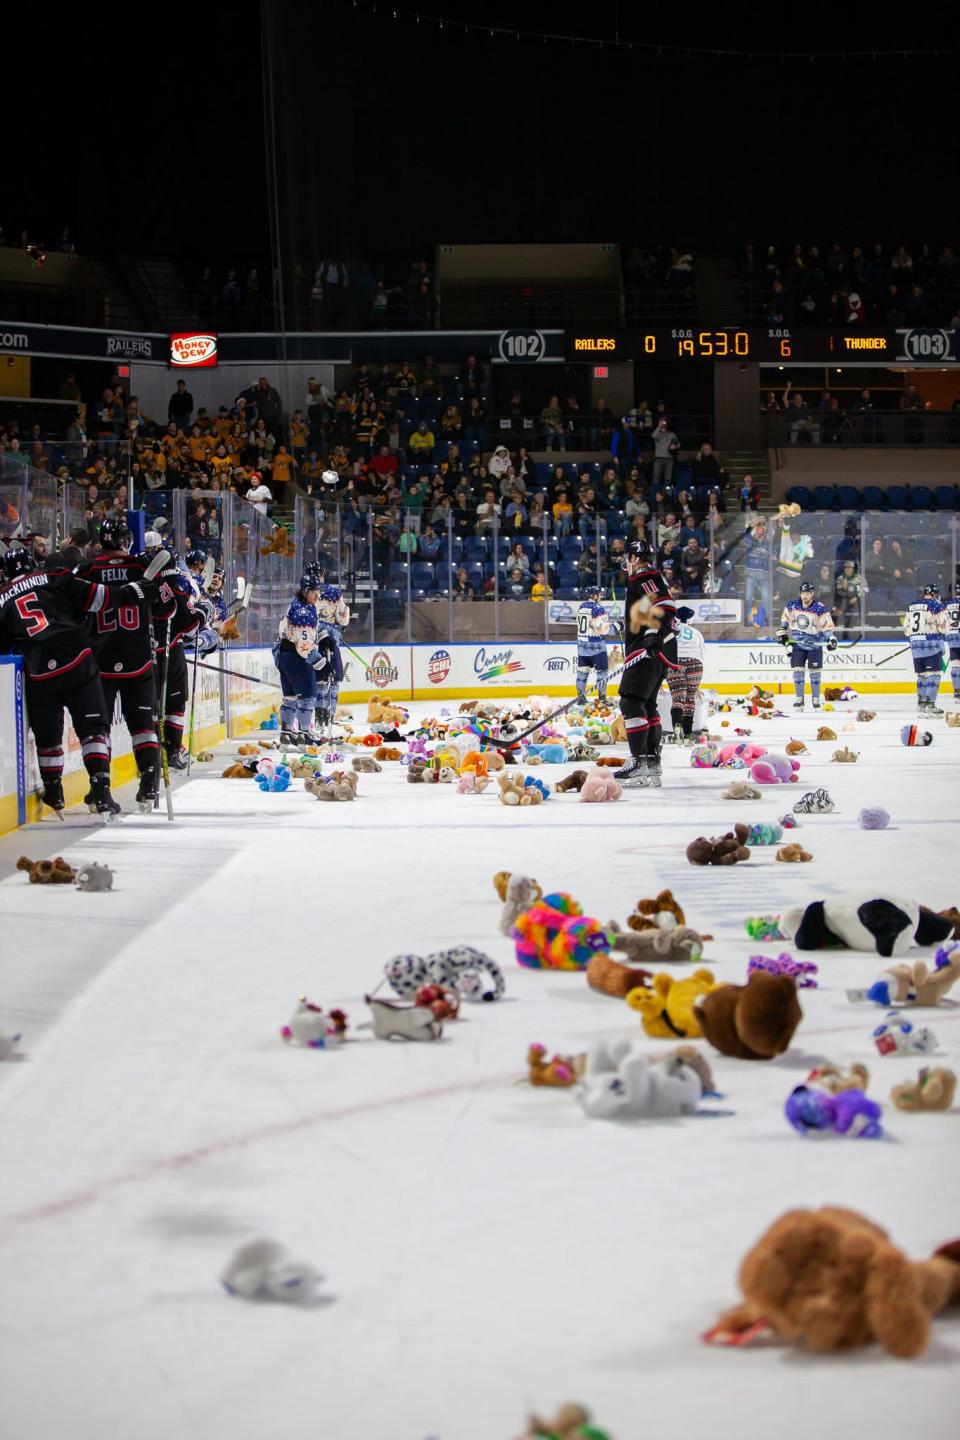 Worcester Railers players collect teddy bears that were tossed onto the ice during a game against the Adirondack Thunder on Saturday at DCU Center.